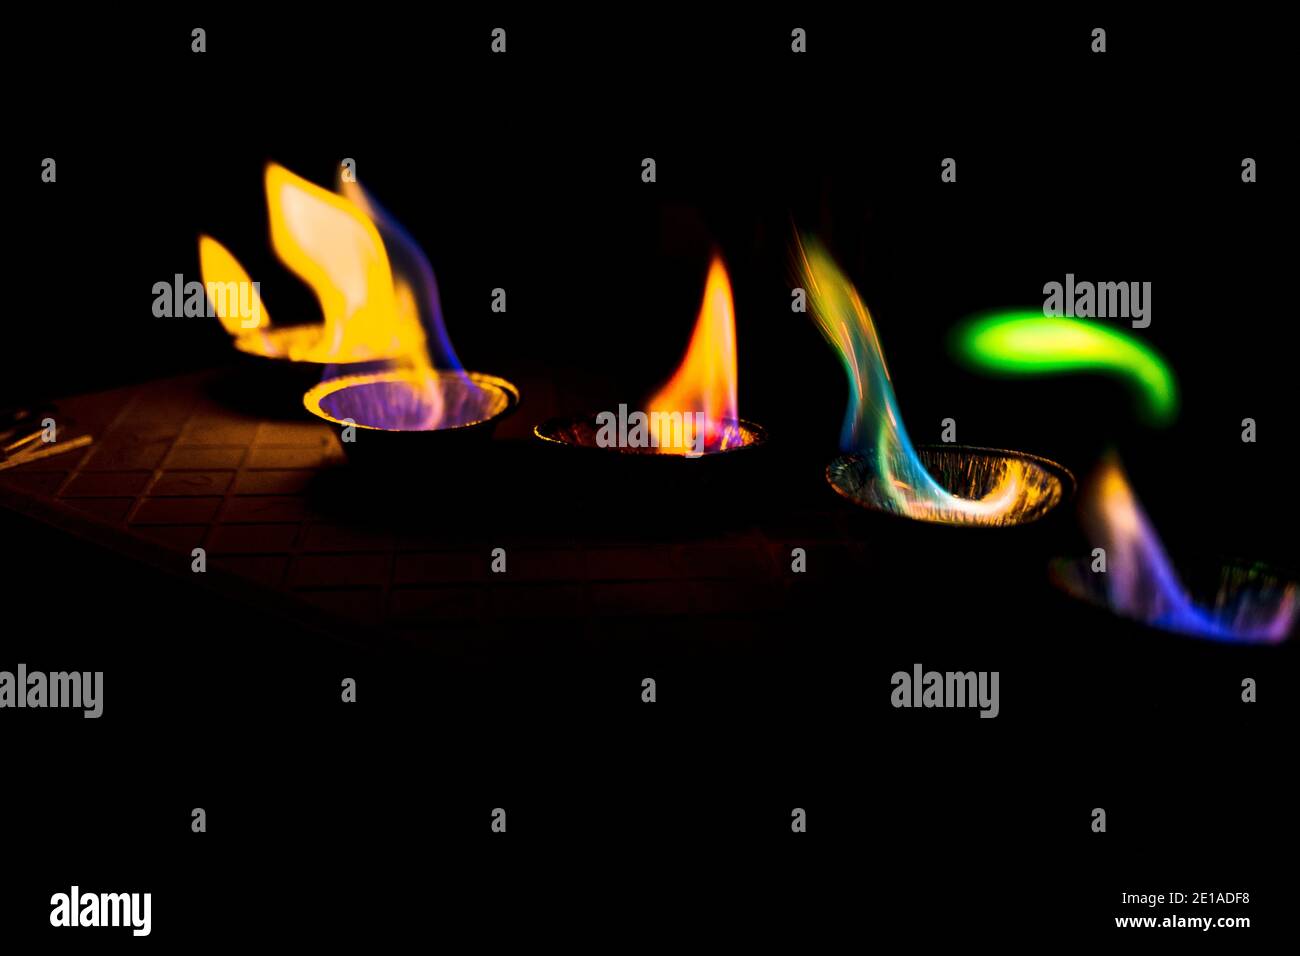 chemical experiment with fire. multi-colored flames in the dark. Stock Photo